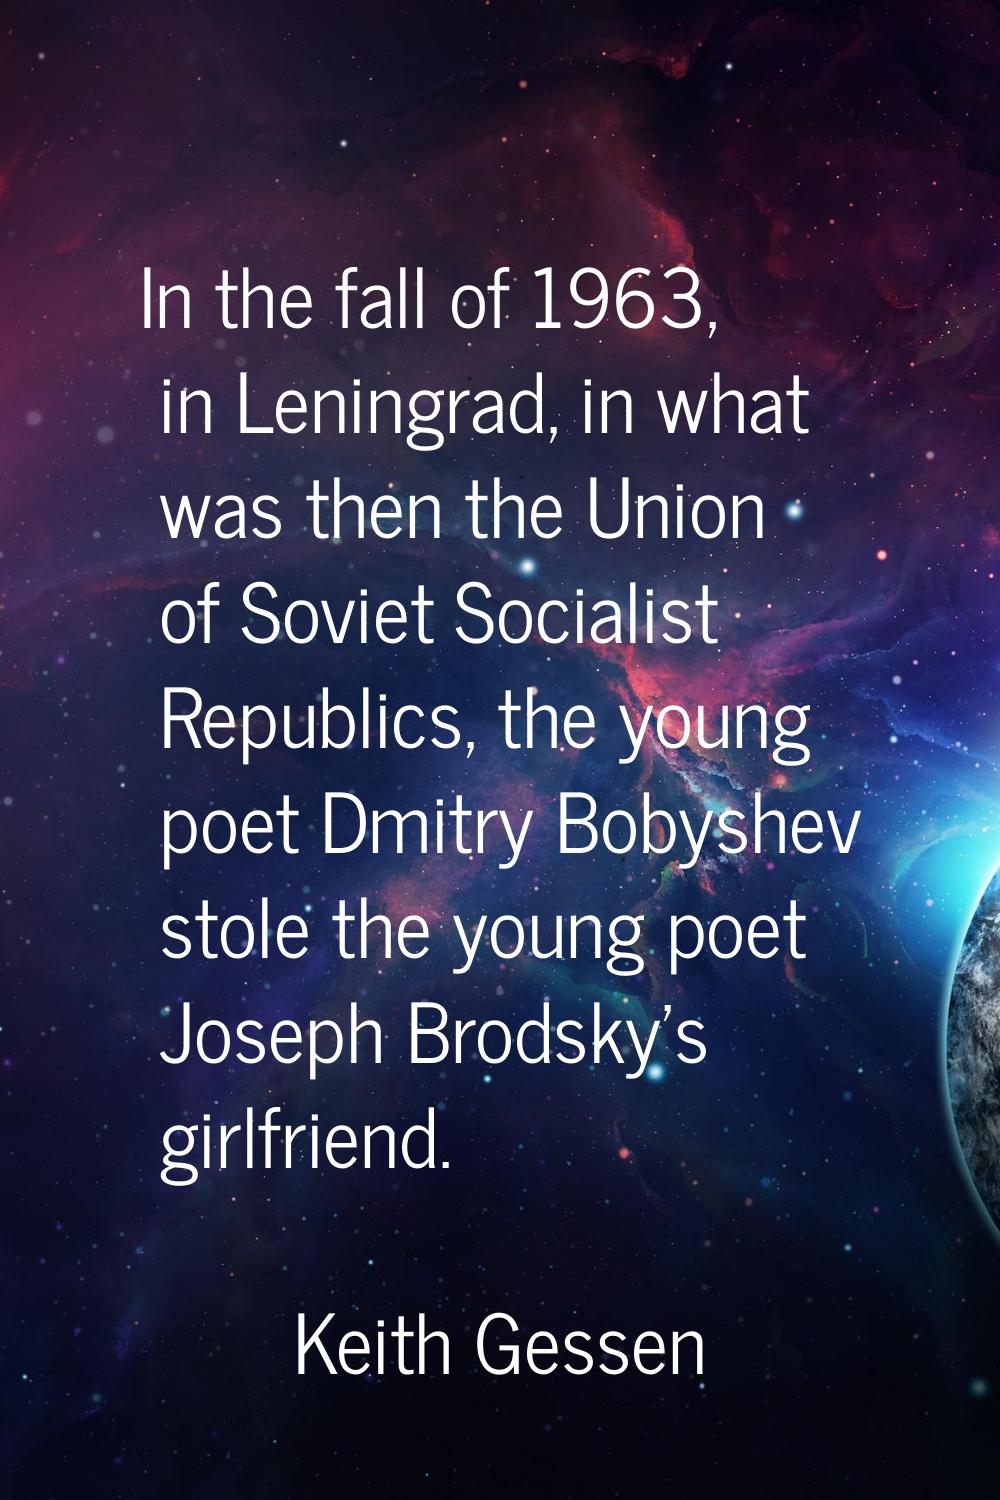 In the fall of 1963, in Leningrad, in what was then the Union of Soviet Socialist Republics, the yo